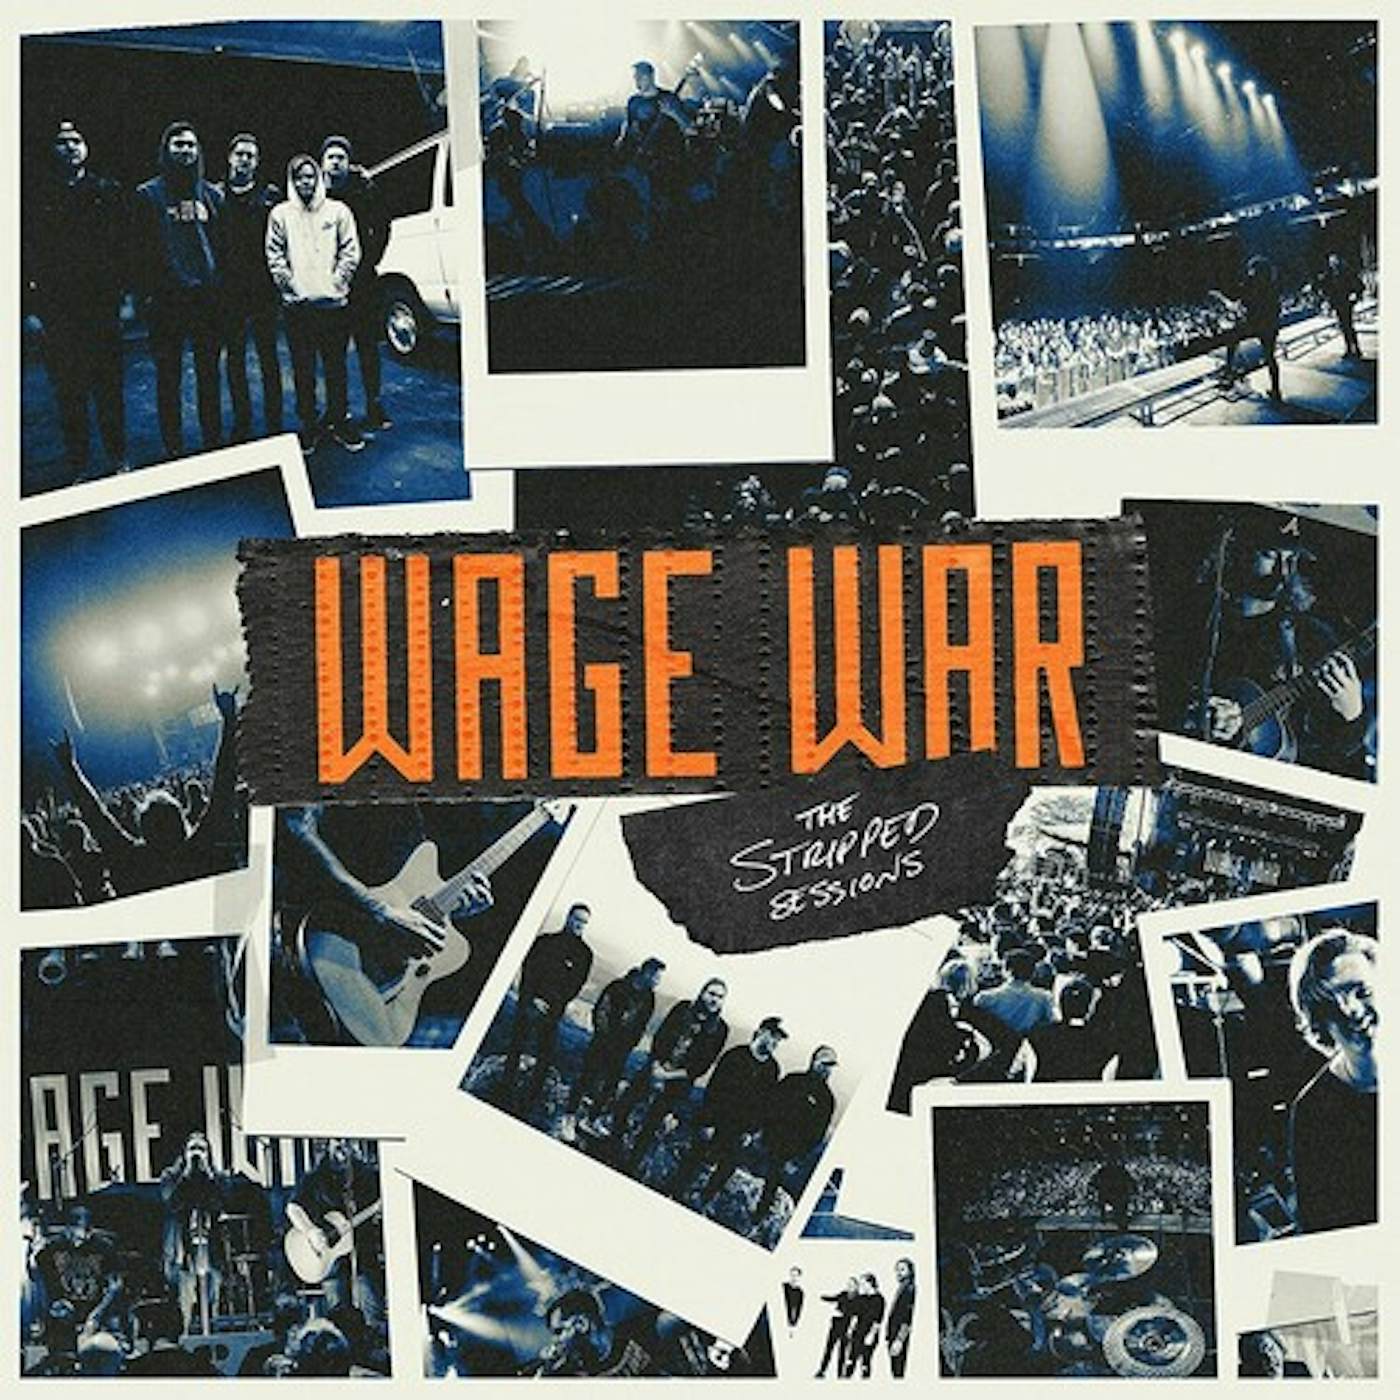 Wage War STRIPPED SESSIONS CD